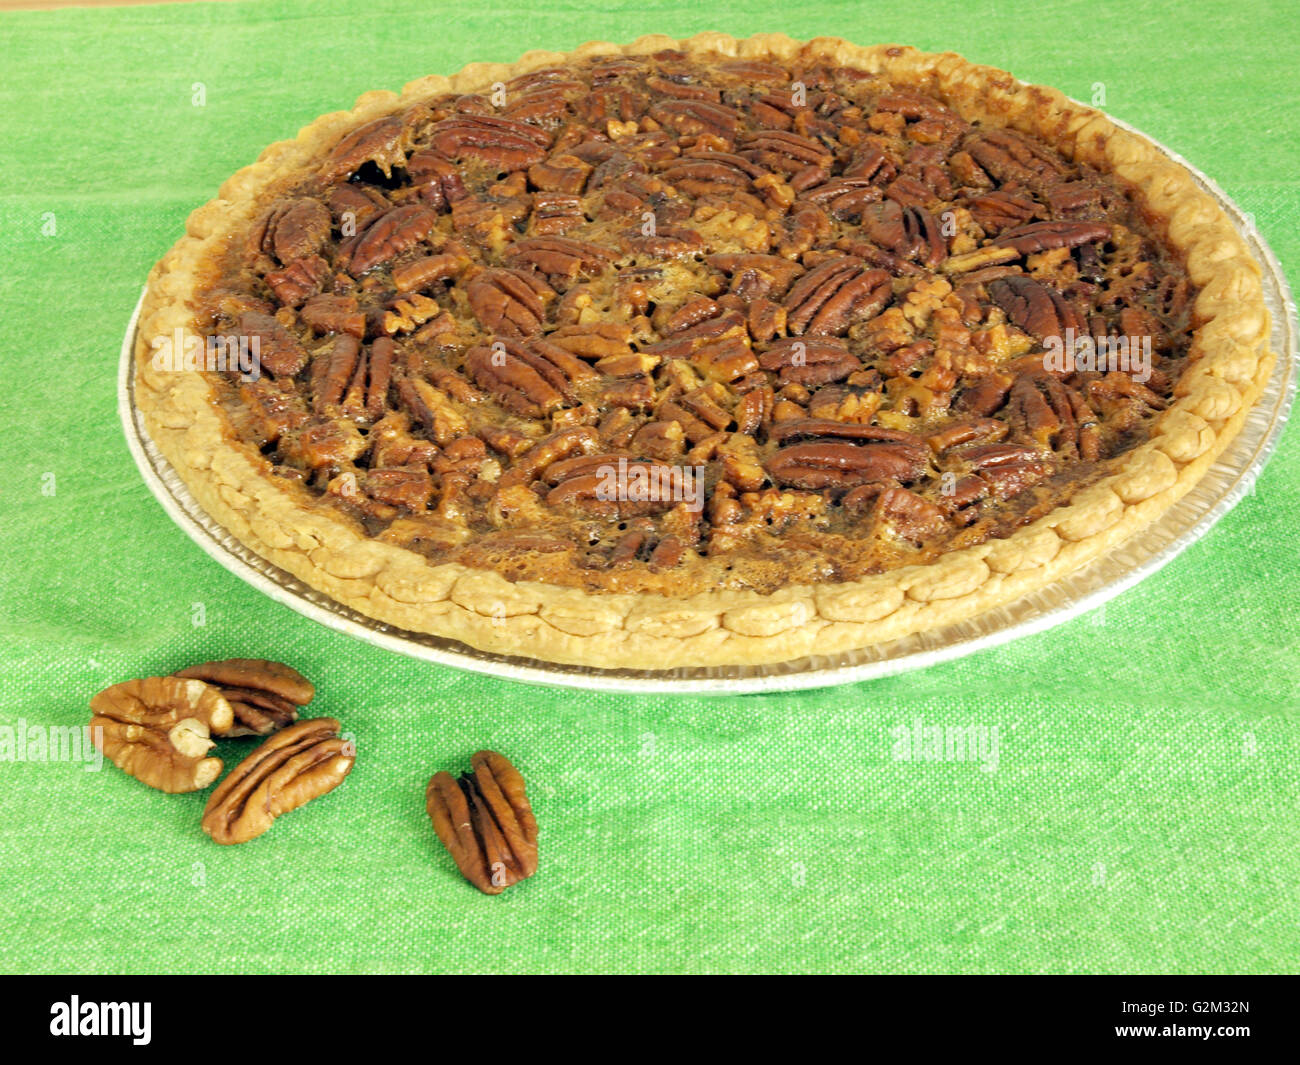 image of homemade pecan pie on a green table cloth Stock Photo